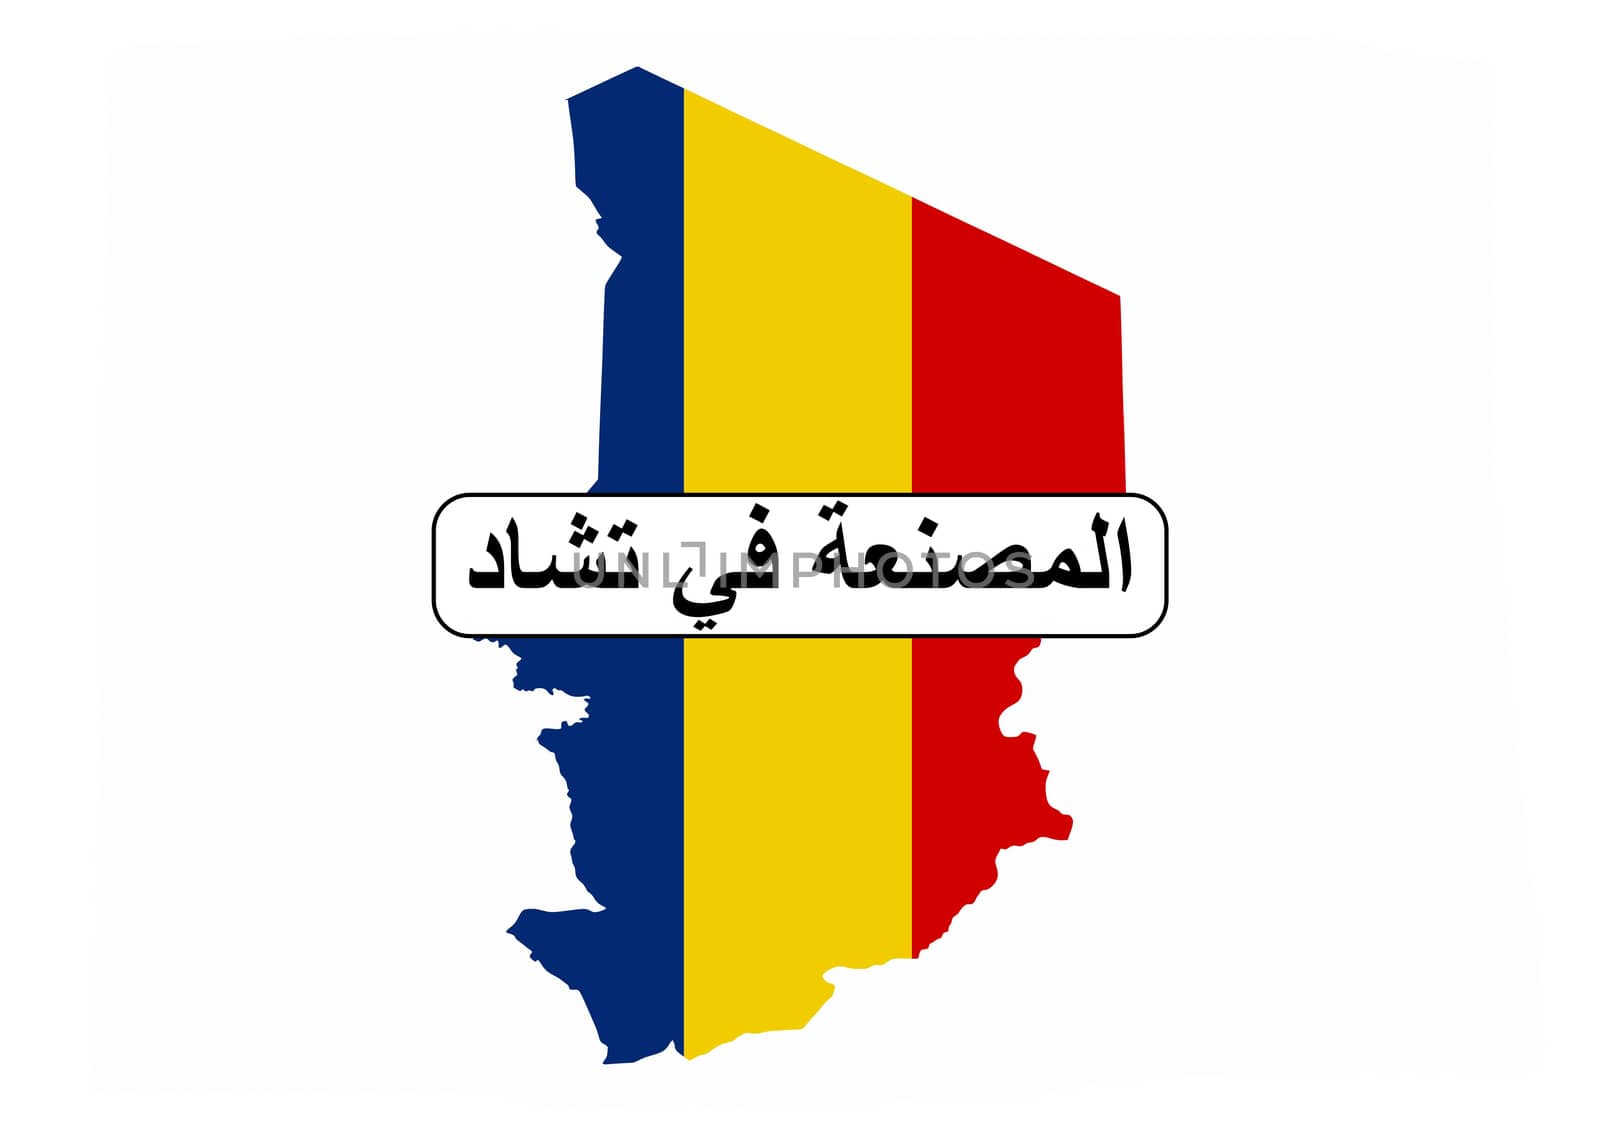 made in chad country national flag map shape with text